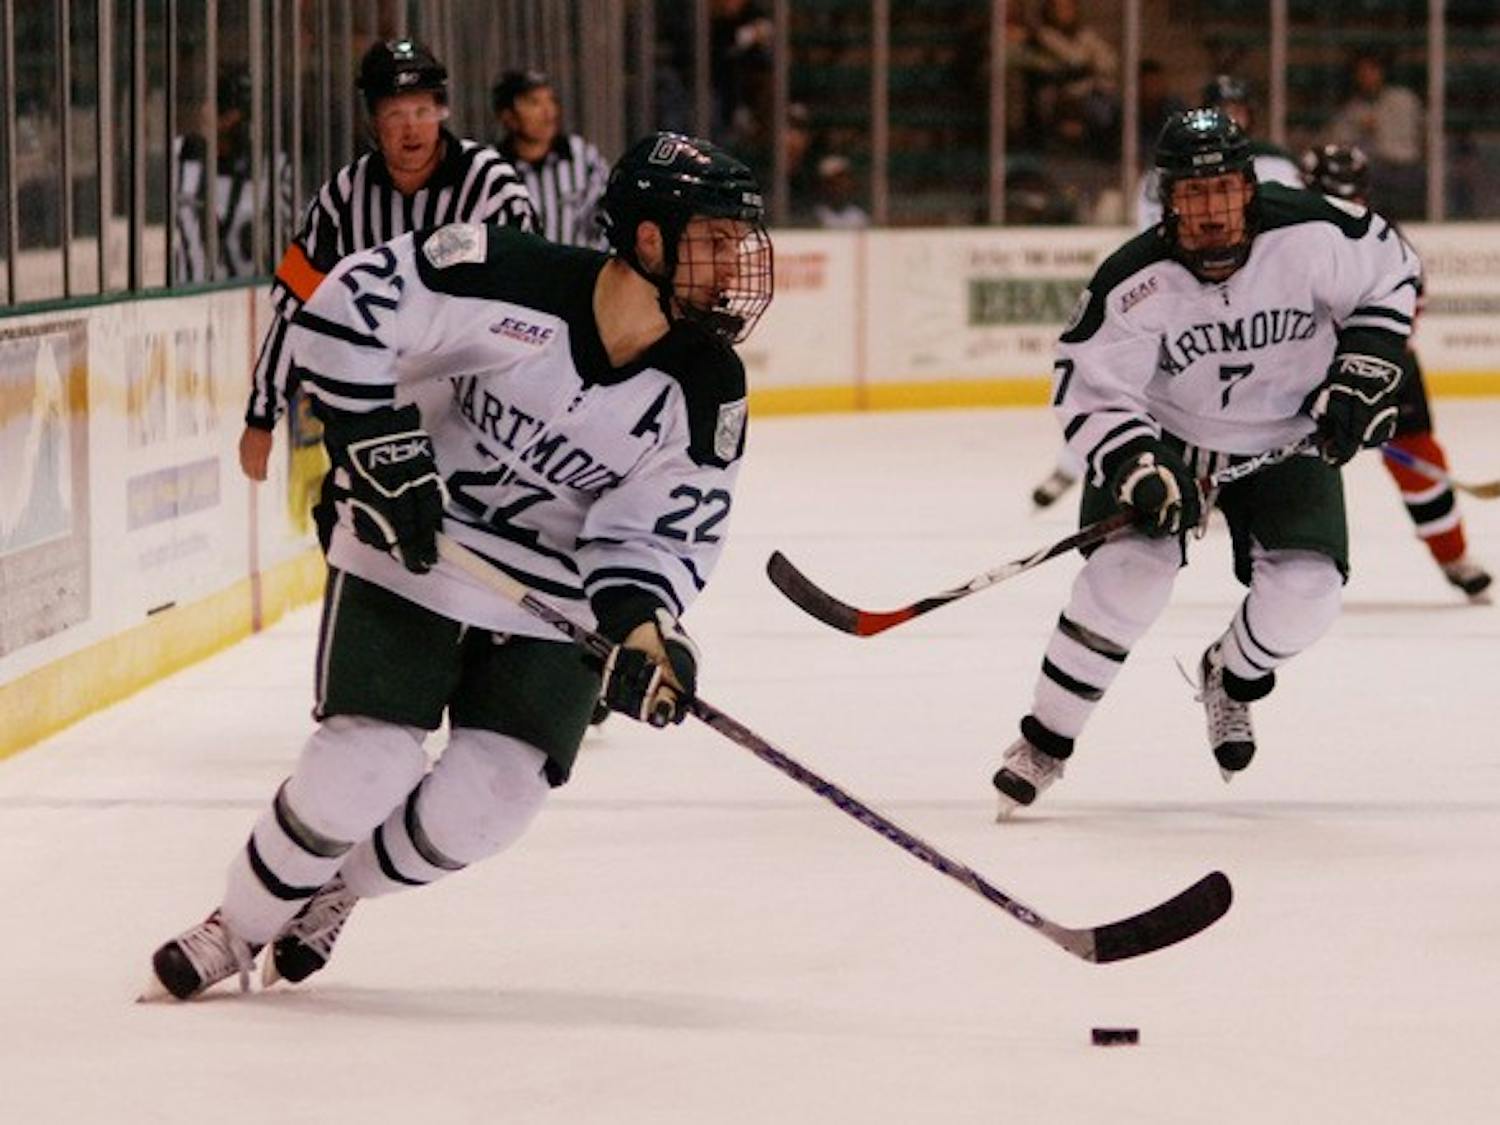 The Big Green men's hockey team expects to leave early-season growing pains behind after early winter contests.